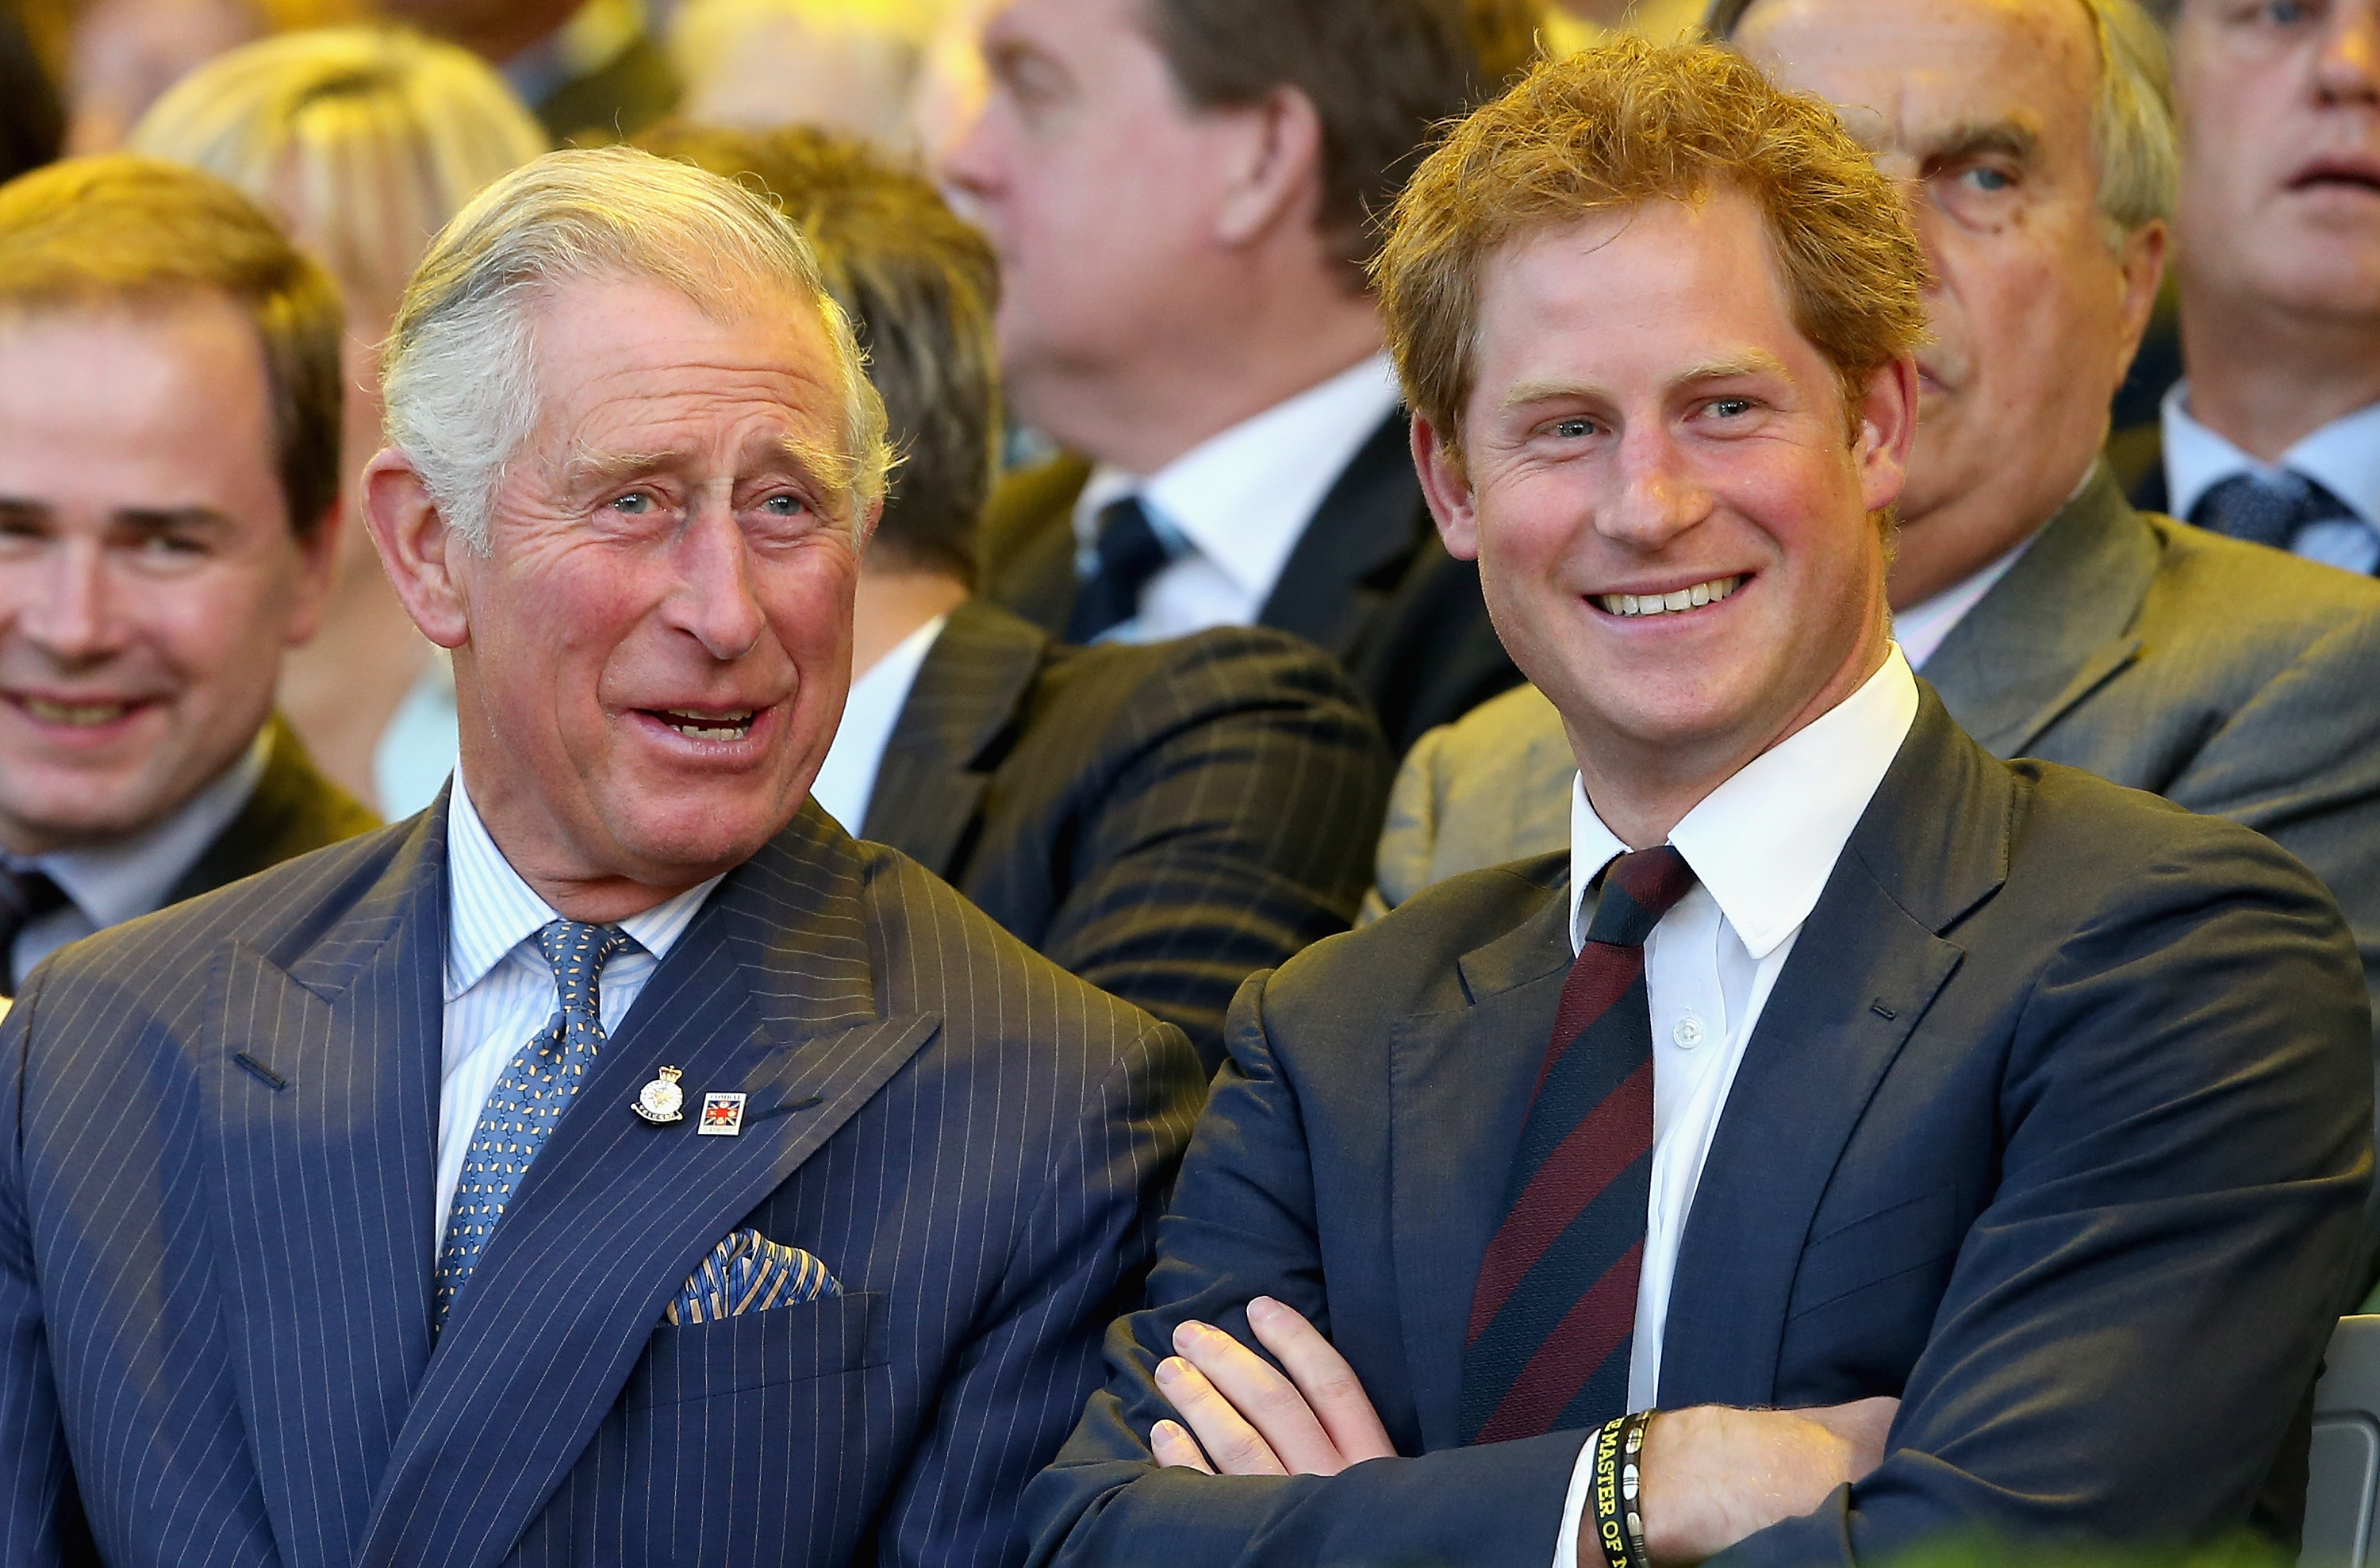 King Charles III and Prince Harry at the Invictus Games Opening Ceremony in London, England on September 10, 2014 | Source: Getty Images